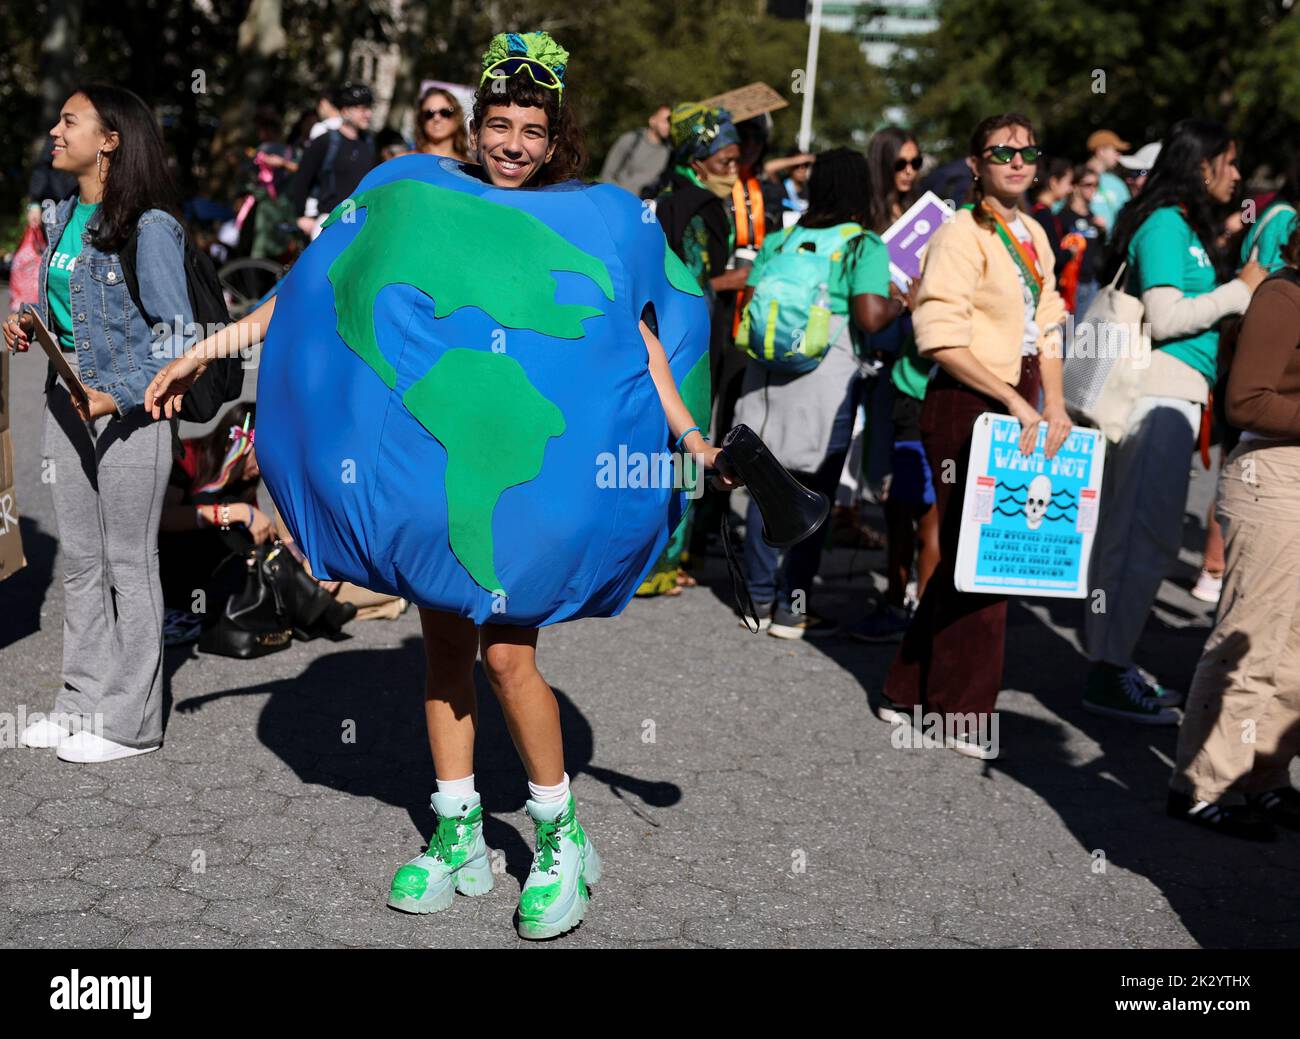 People take part in a Global Climate Strike, to demand governments to take action against global warming, on the sidelines of the 77th Session of the United Nations General Assembly, in New York City, New York, U.S., September 23, 2022. REUTERS/Brendan McDermid Stock Photo